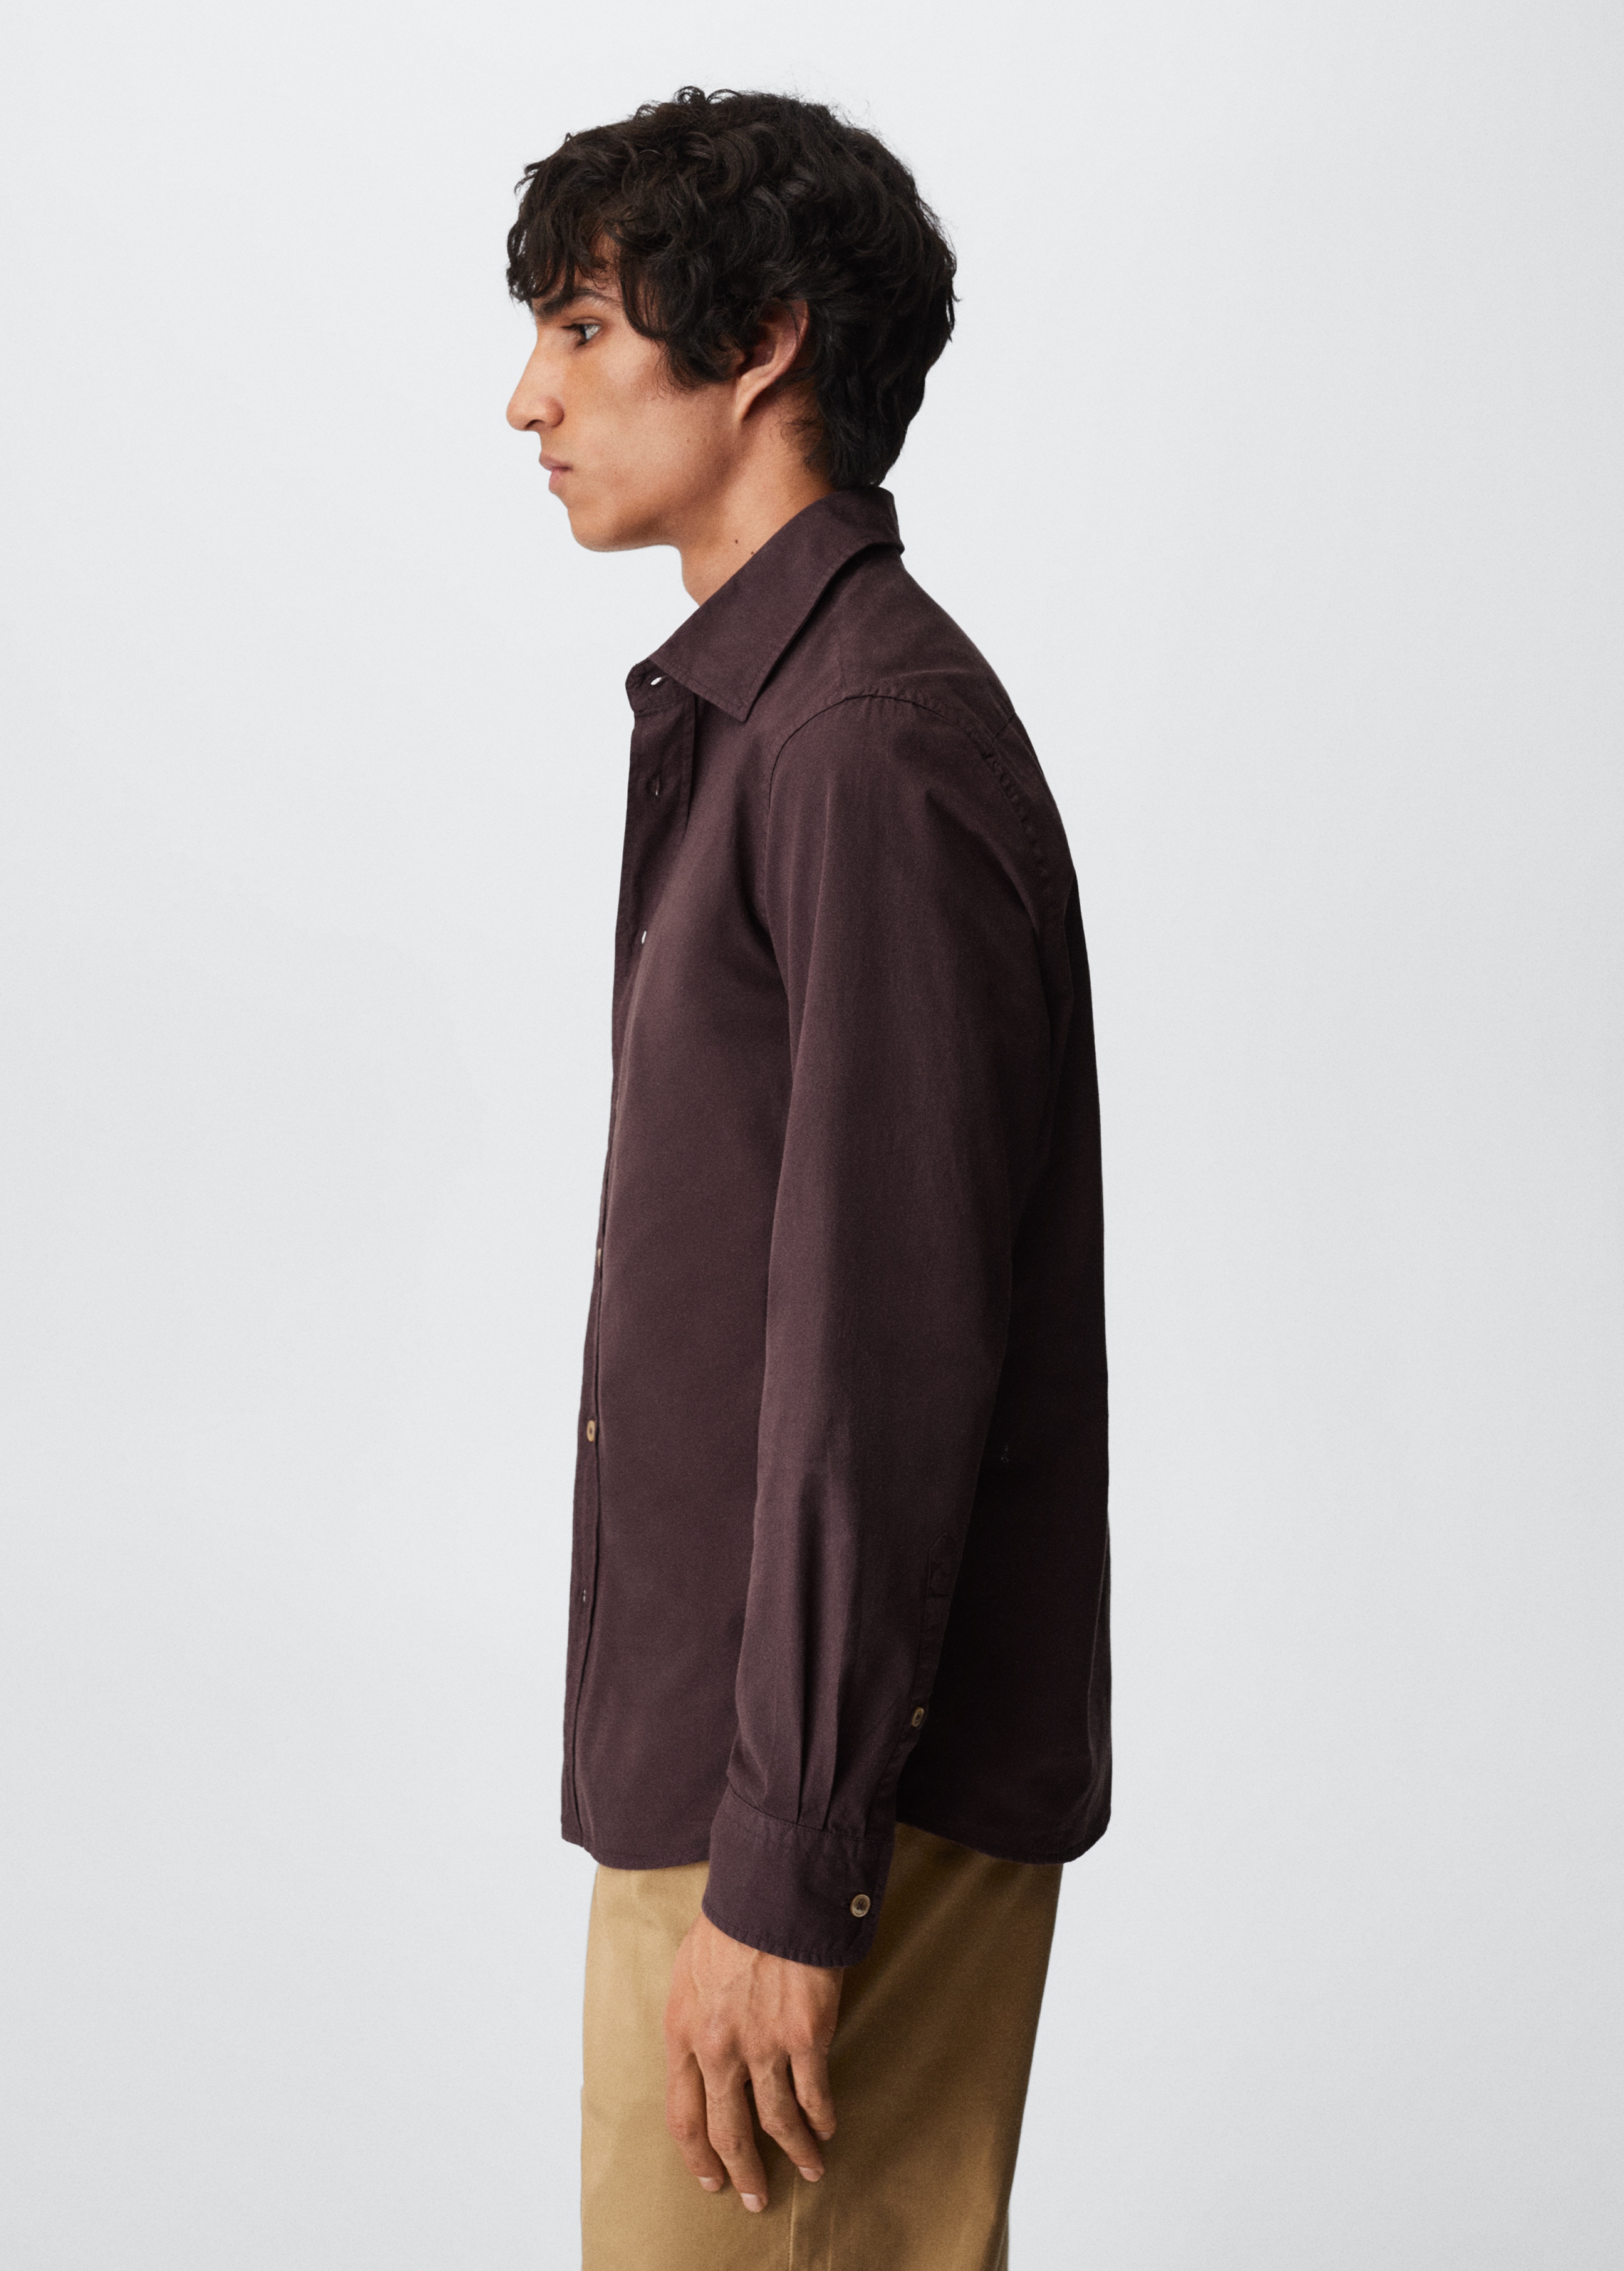 Slim fit cotton shirt - Details of the article 2